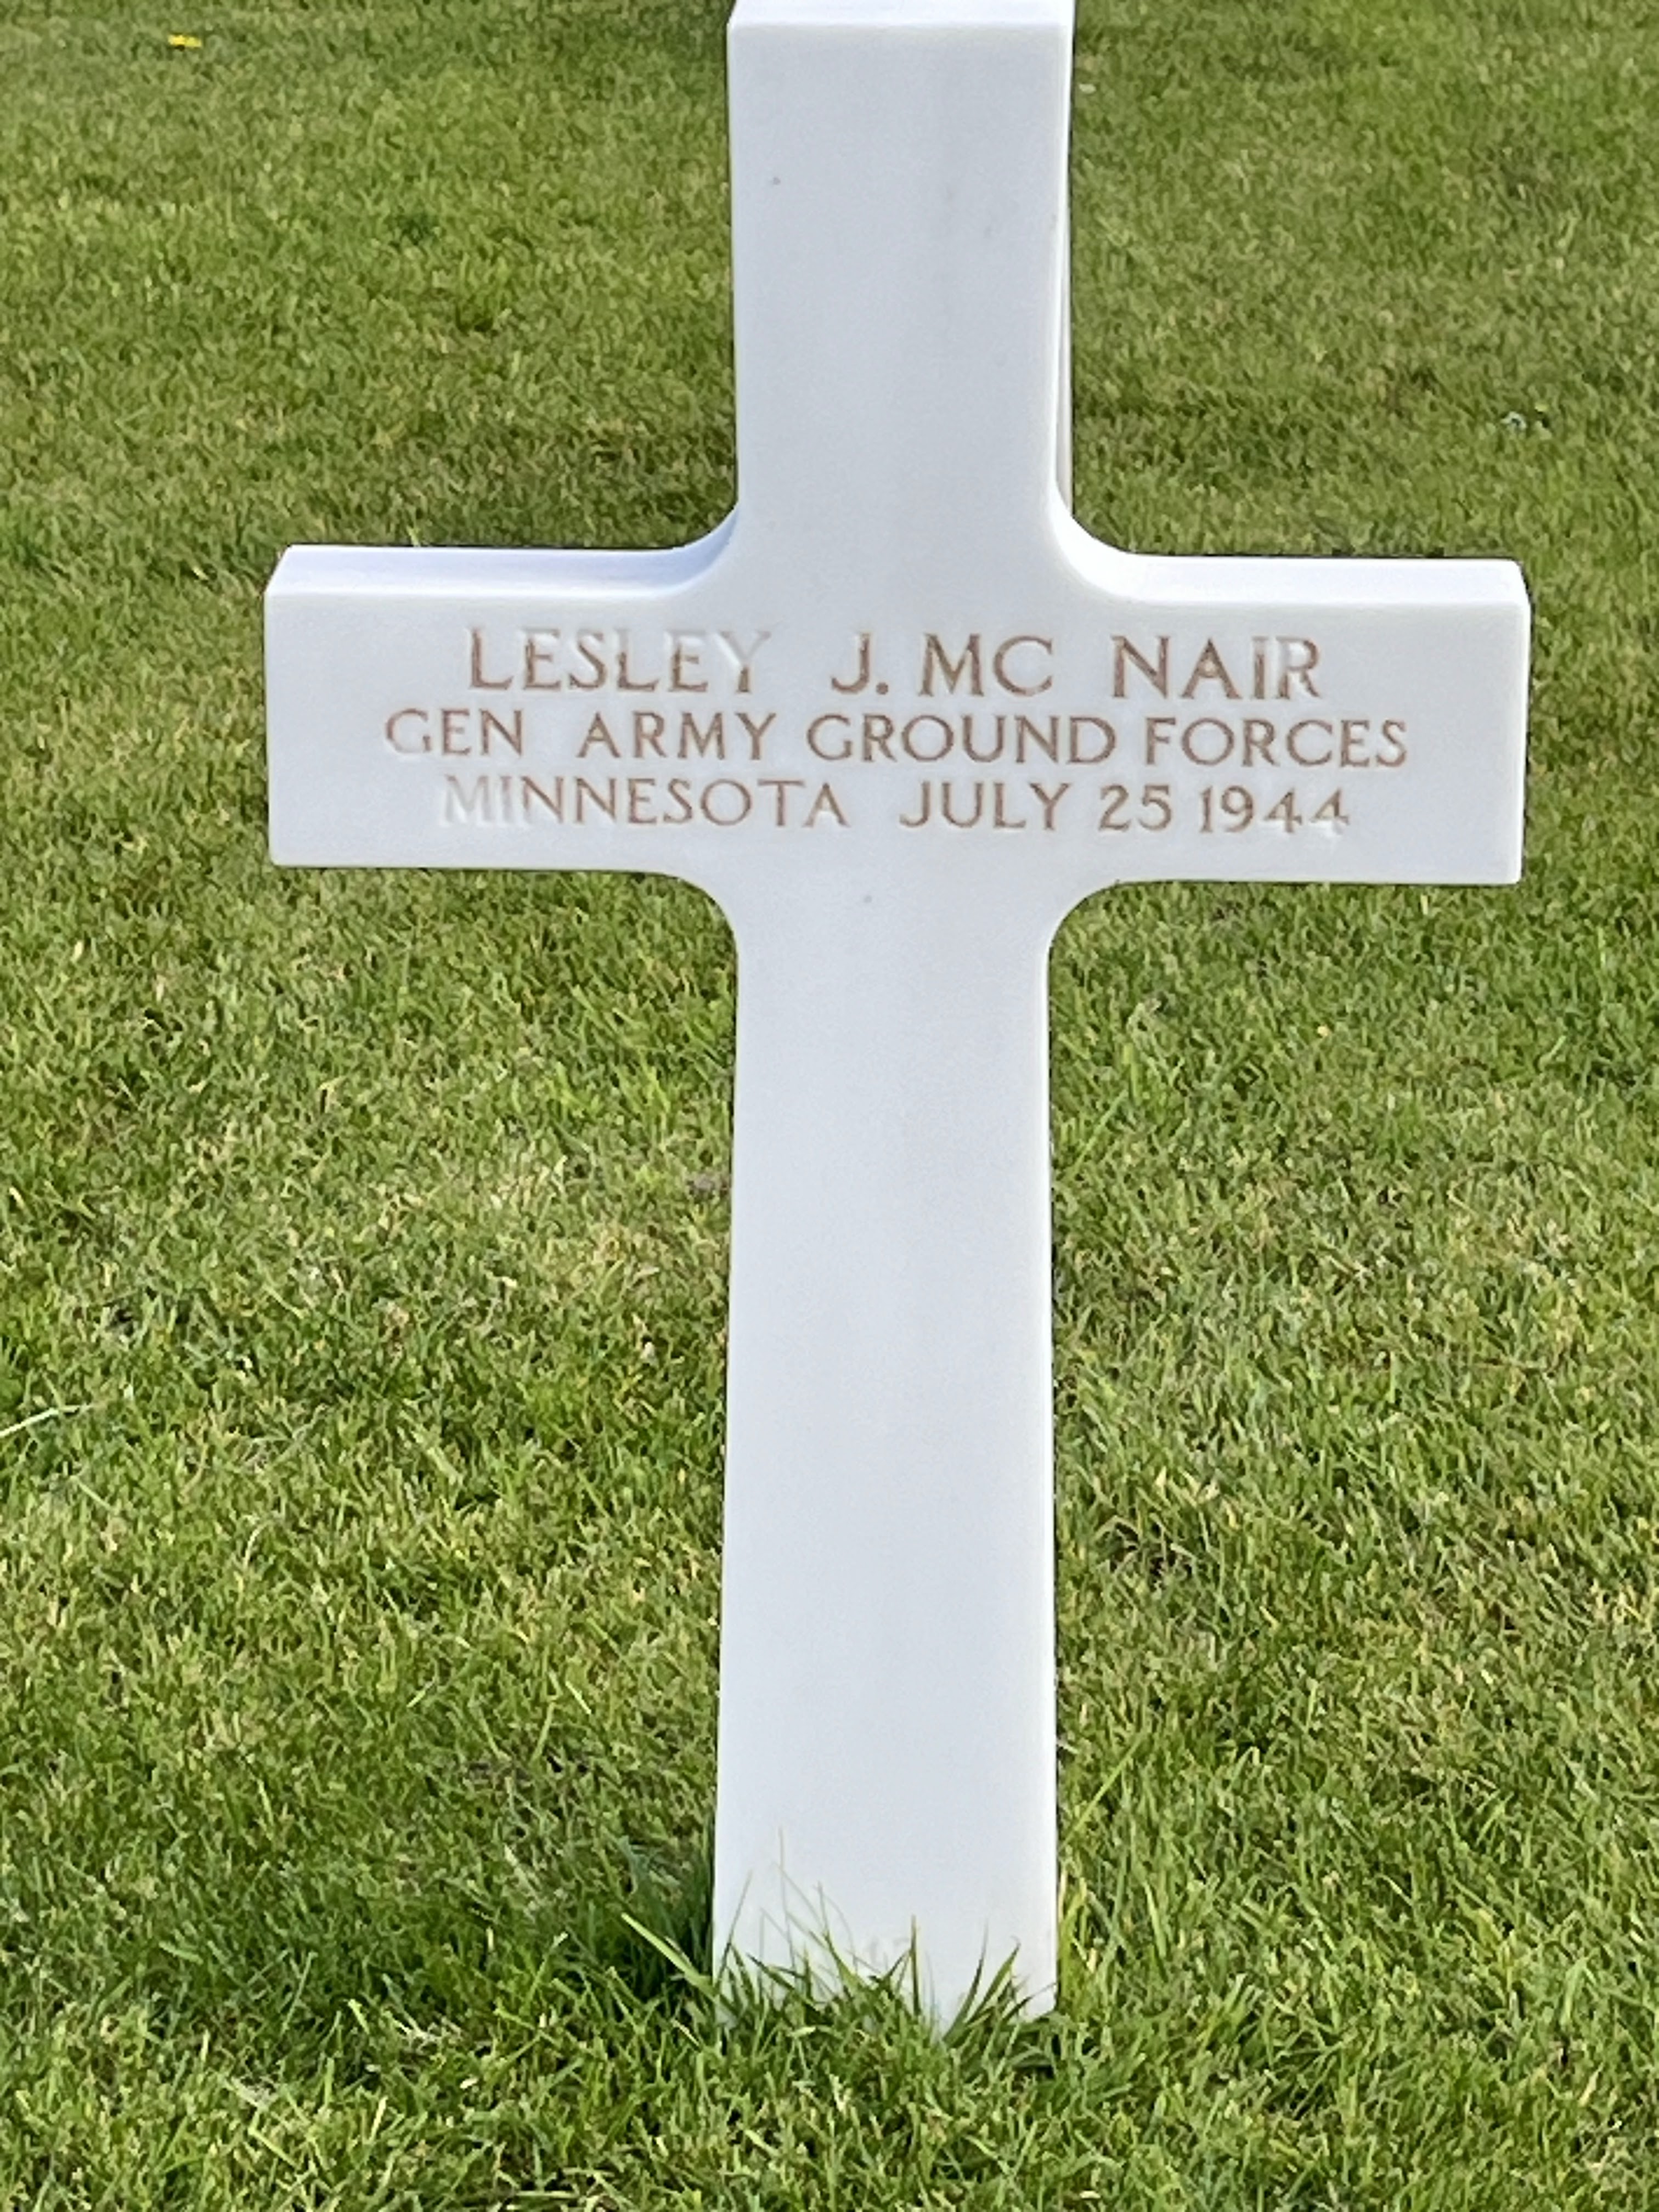 Soldier's grave at Normandy